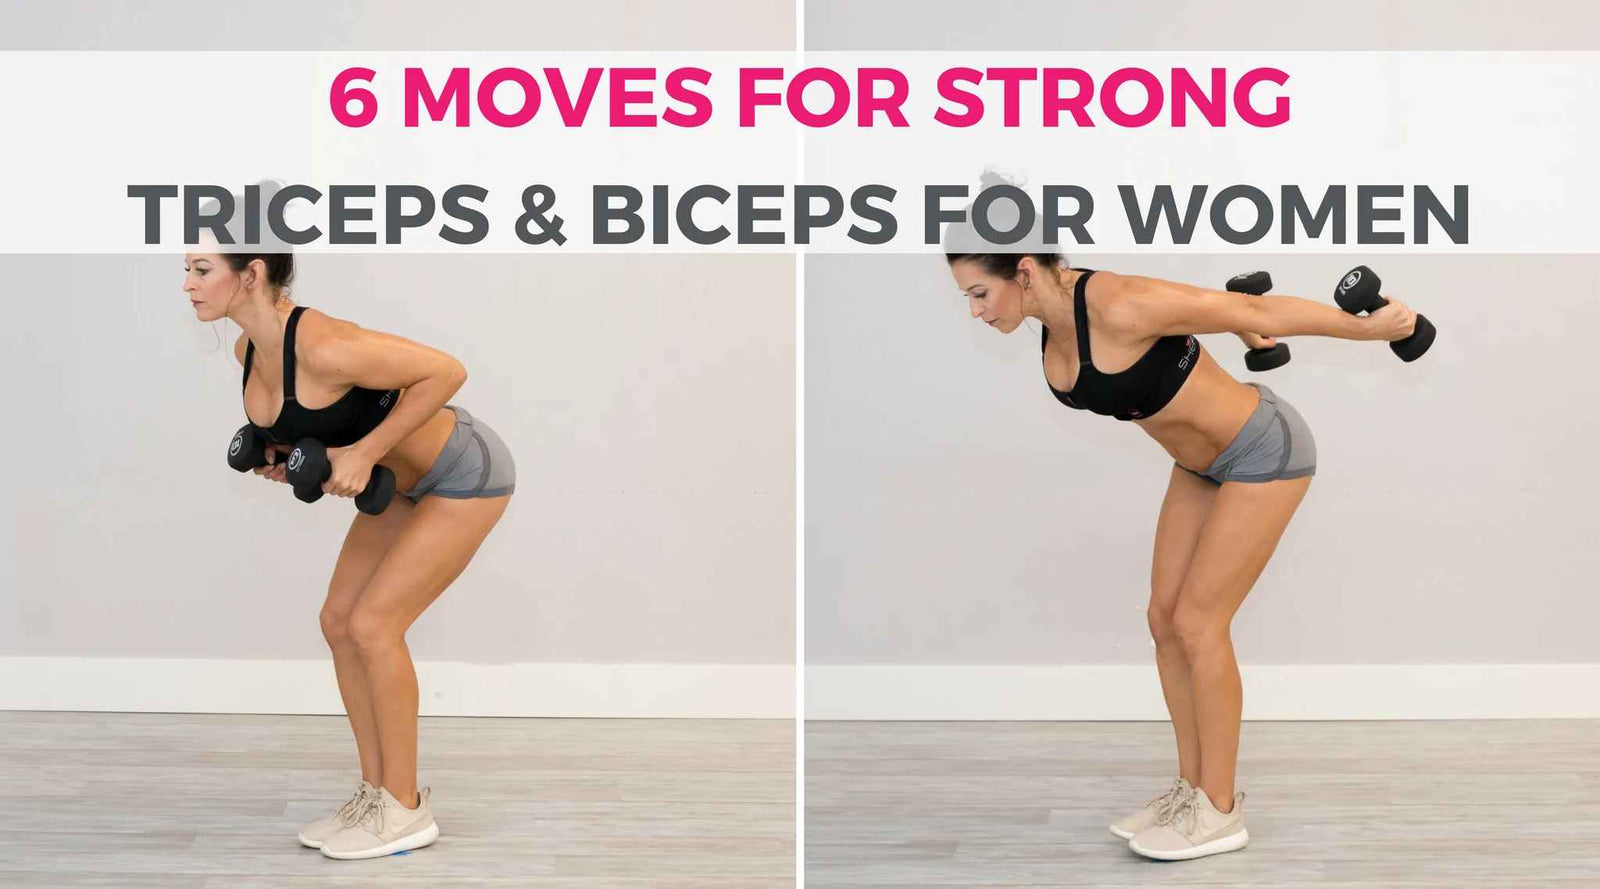 5 Best Arm Workouts For Women To Reduce Arm Fat And Get Toned Arms